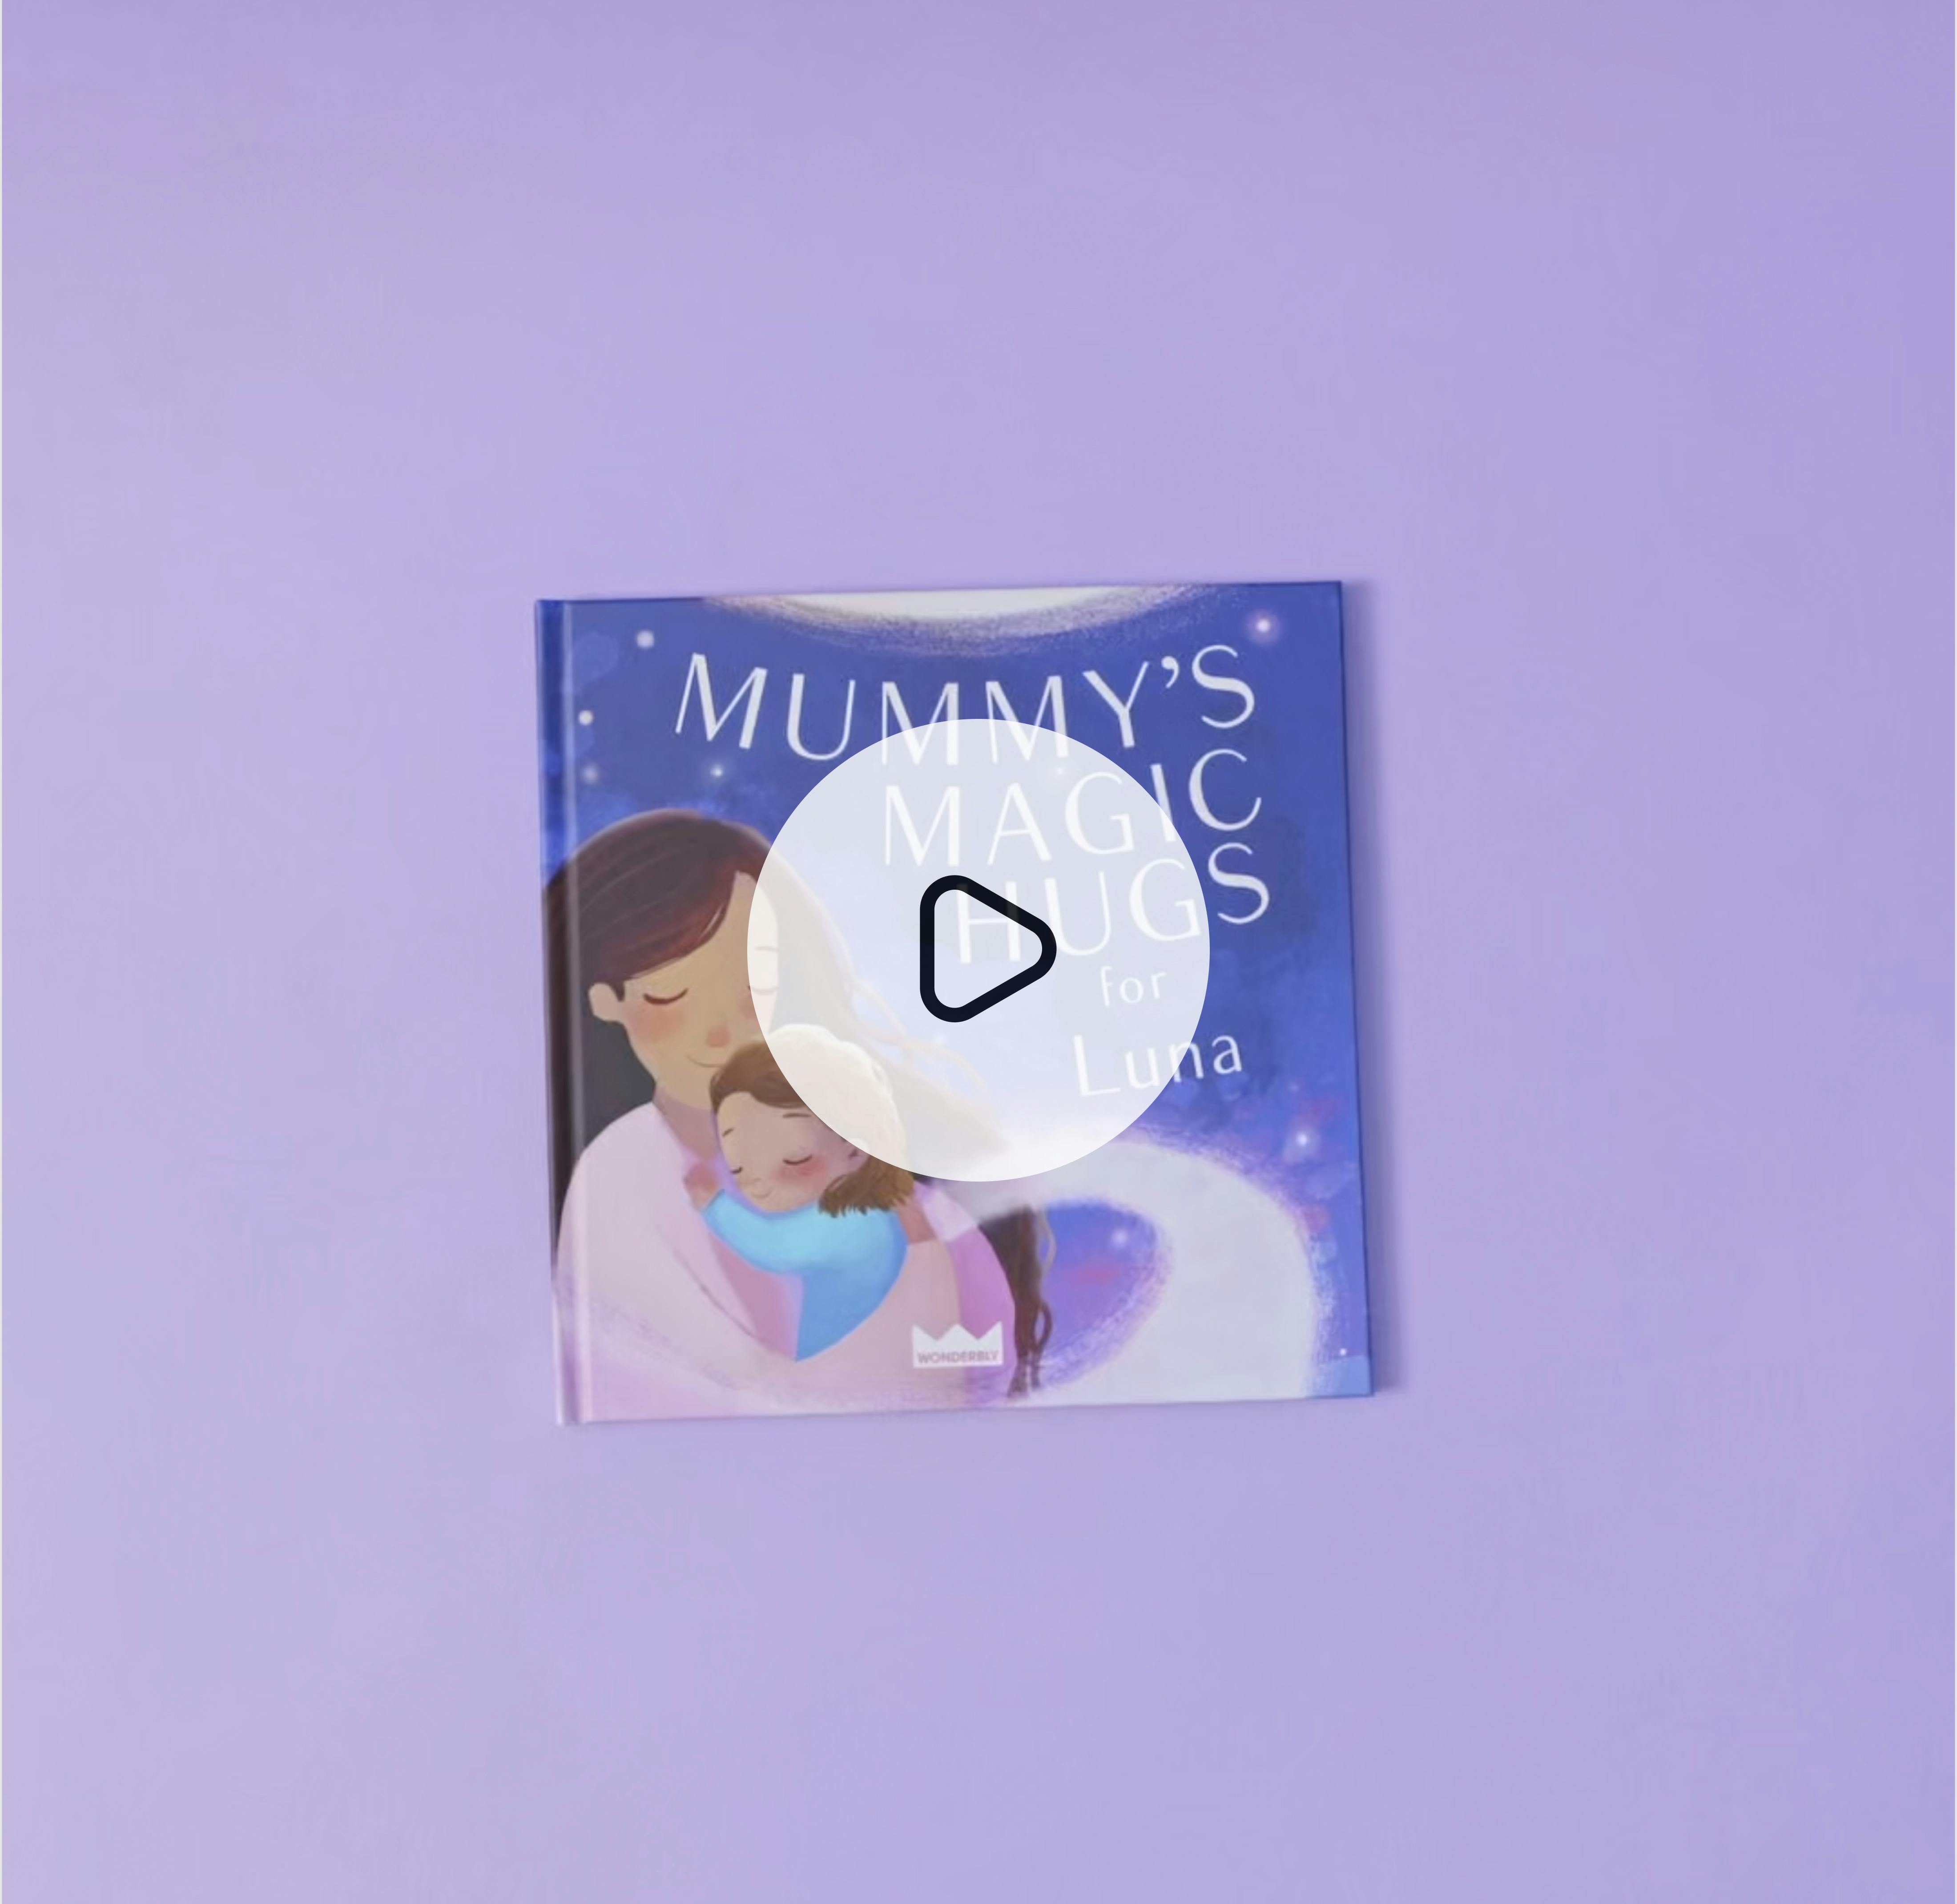 mummy's magic hugs book with a play icon